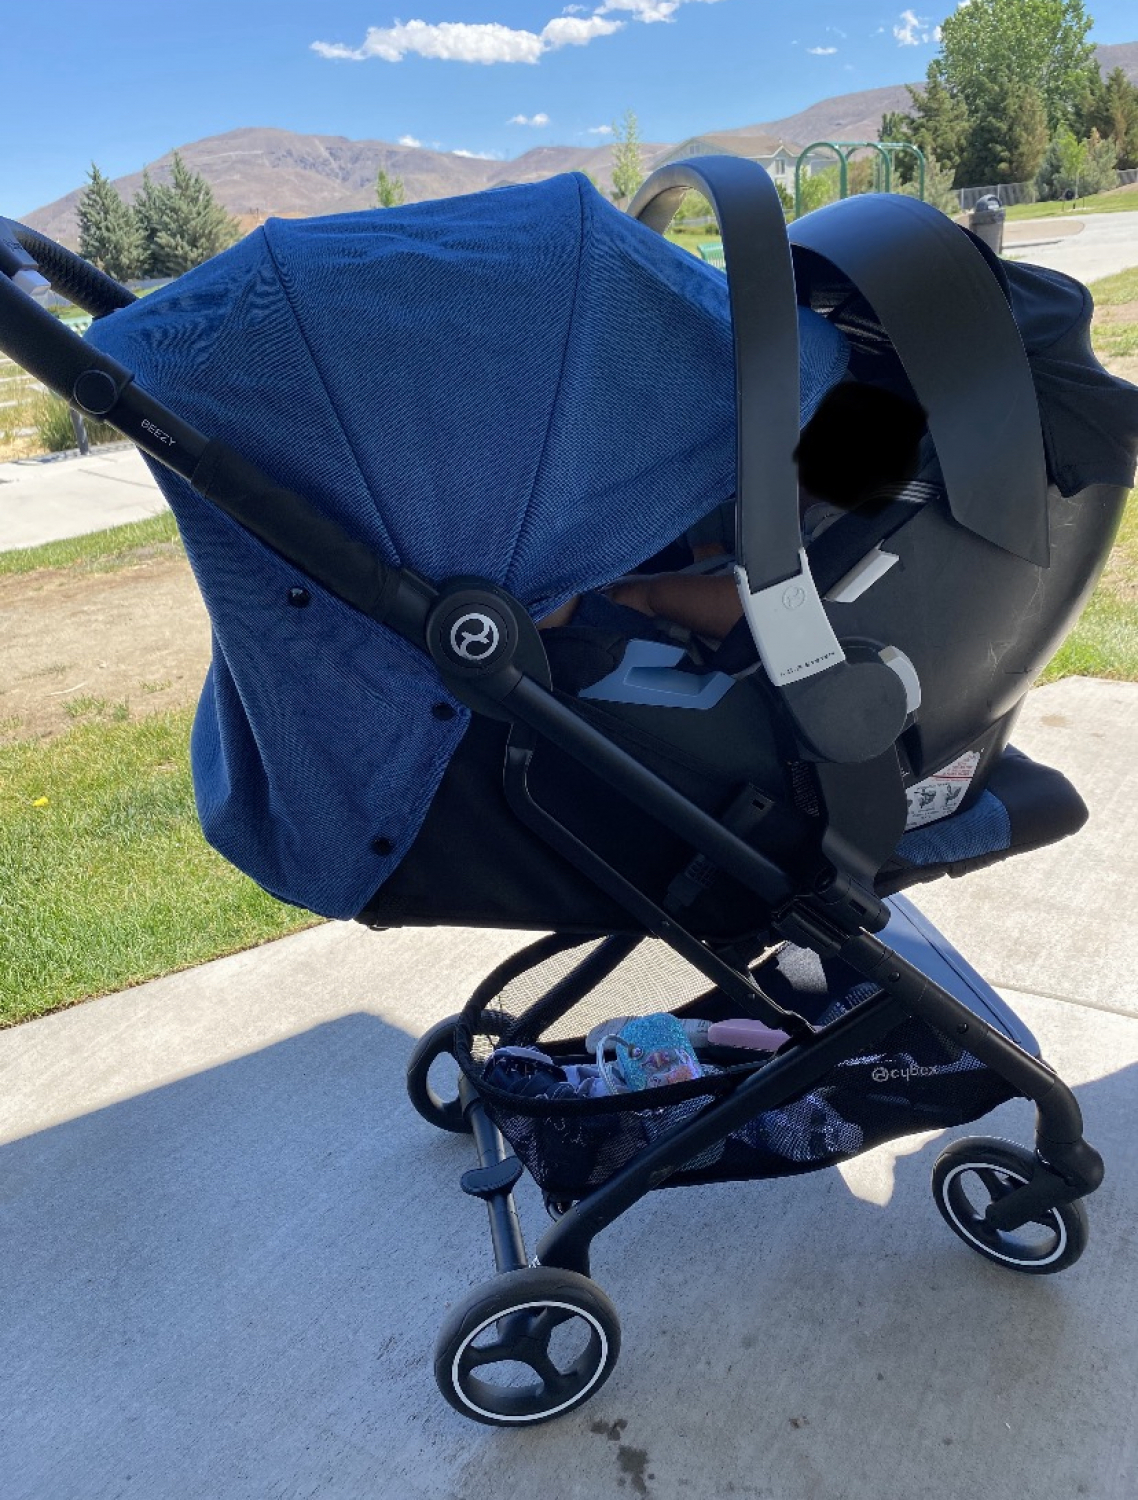 CYBEX Beezy 2 Compact and Lightweight Travel Stroller - Compatible with  CYBEX Car Seats, Ocean Blue - Yahoo Shopping